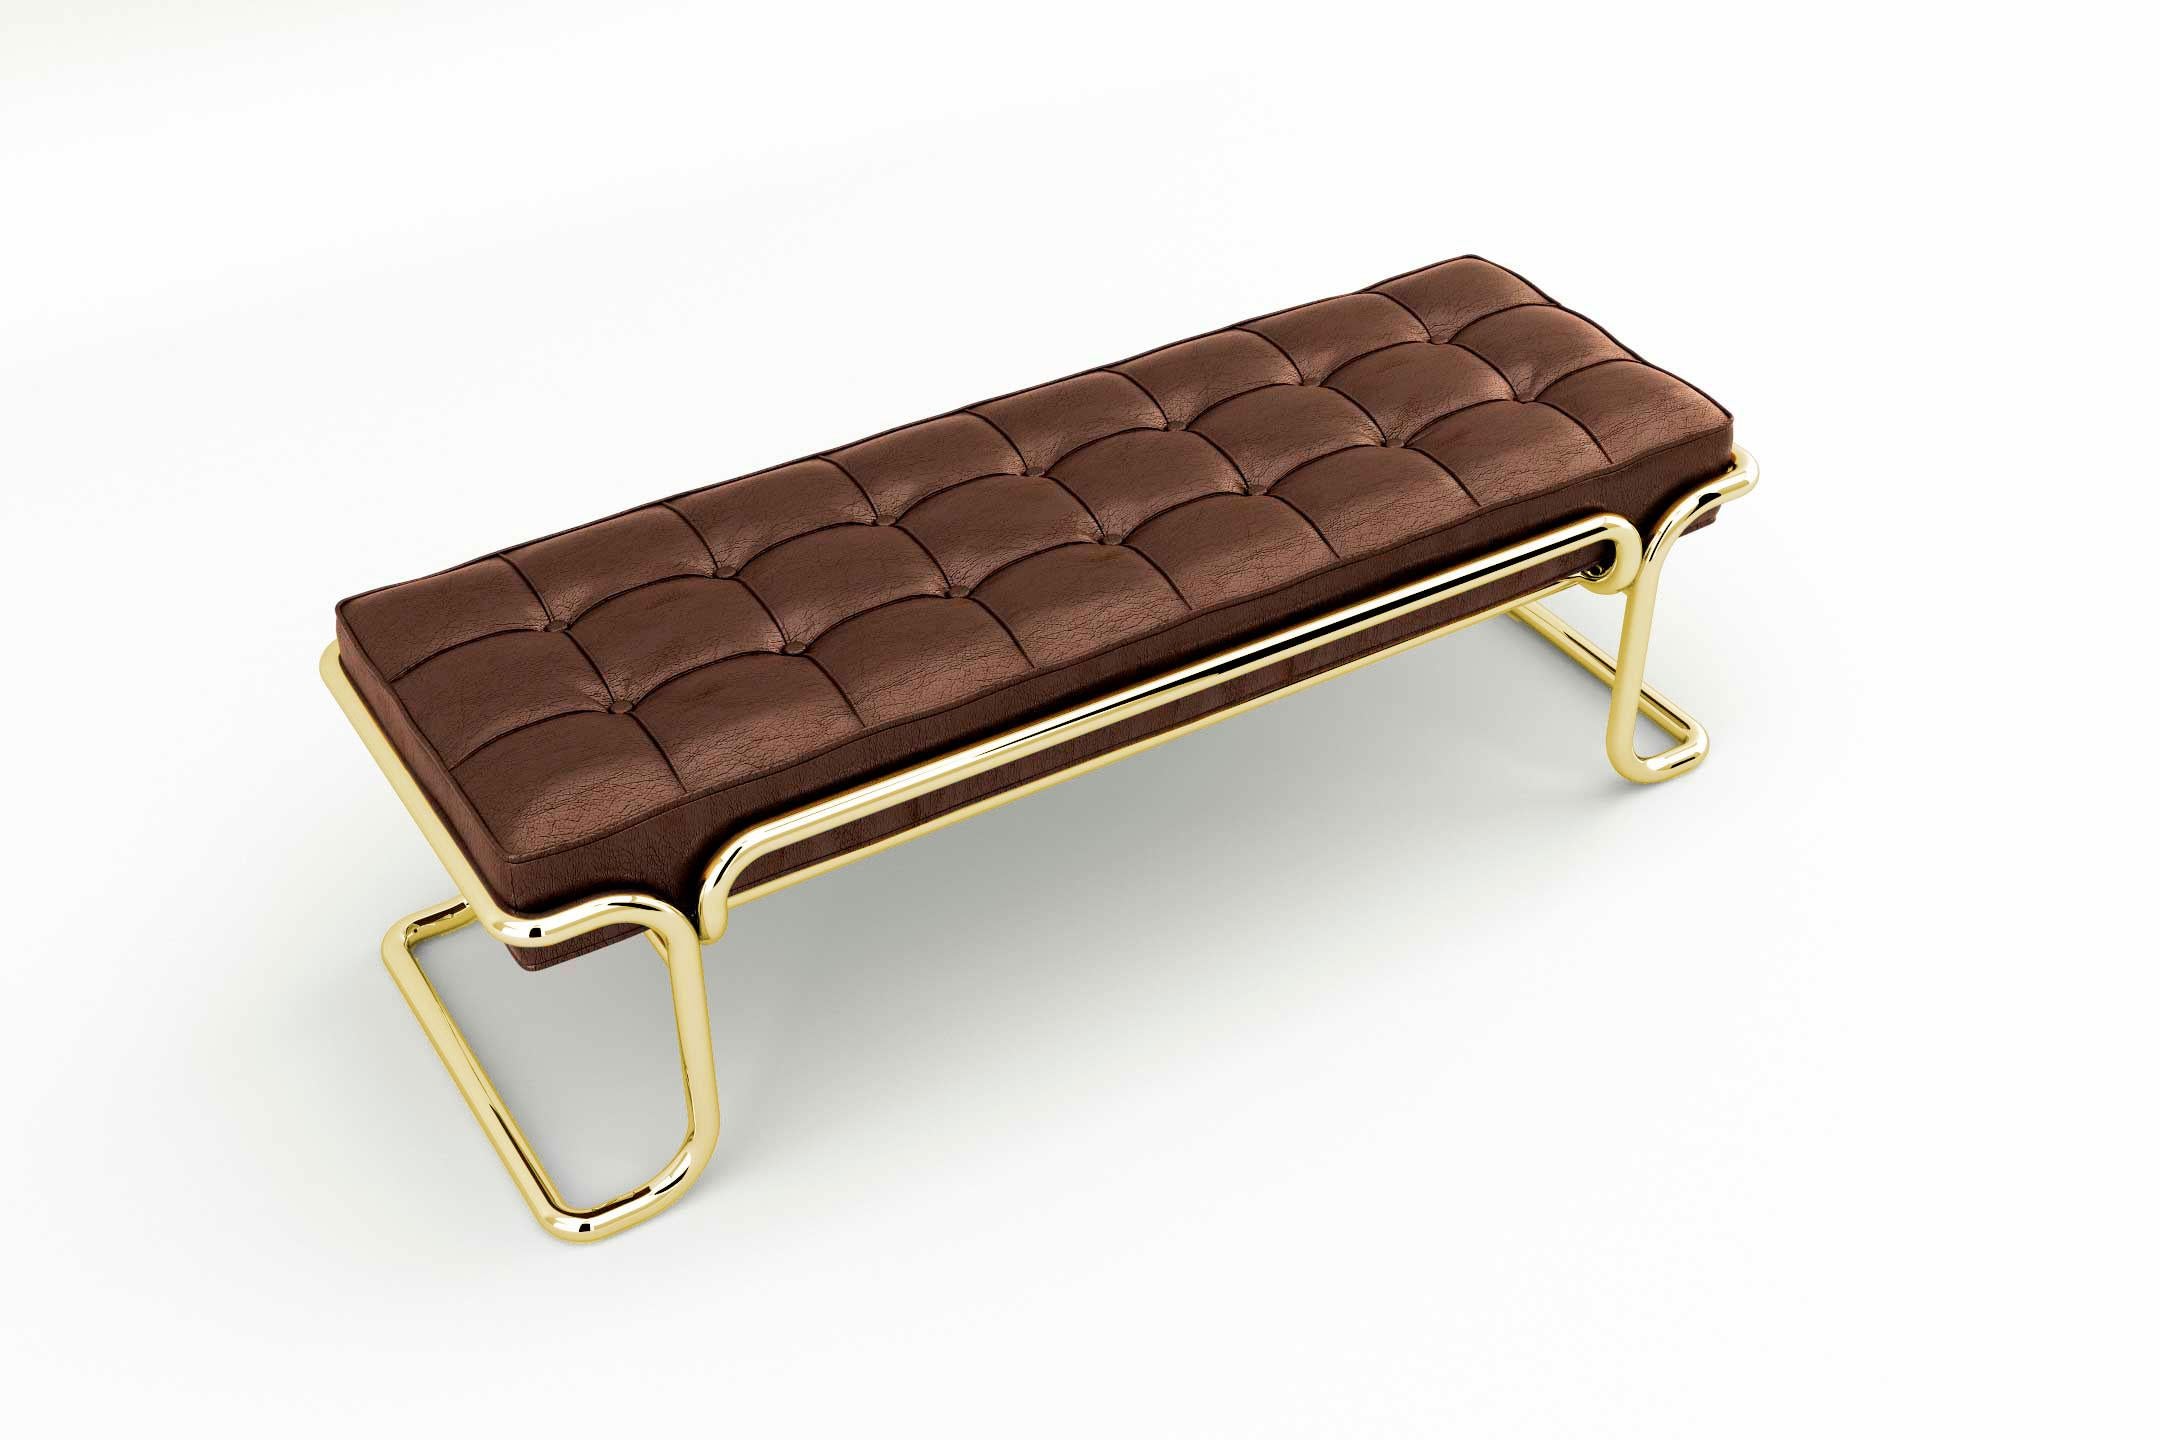 Polished Lotus Banquette - Modern Brown Leather Sofa with Brass Legs For Sale